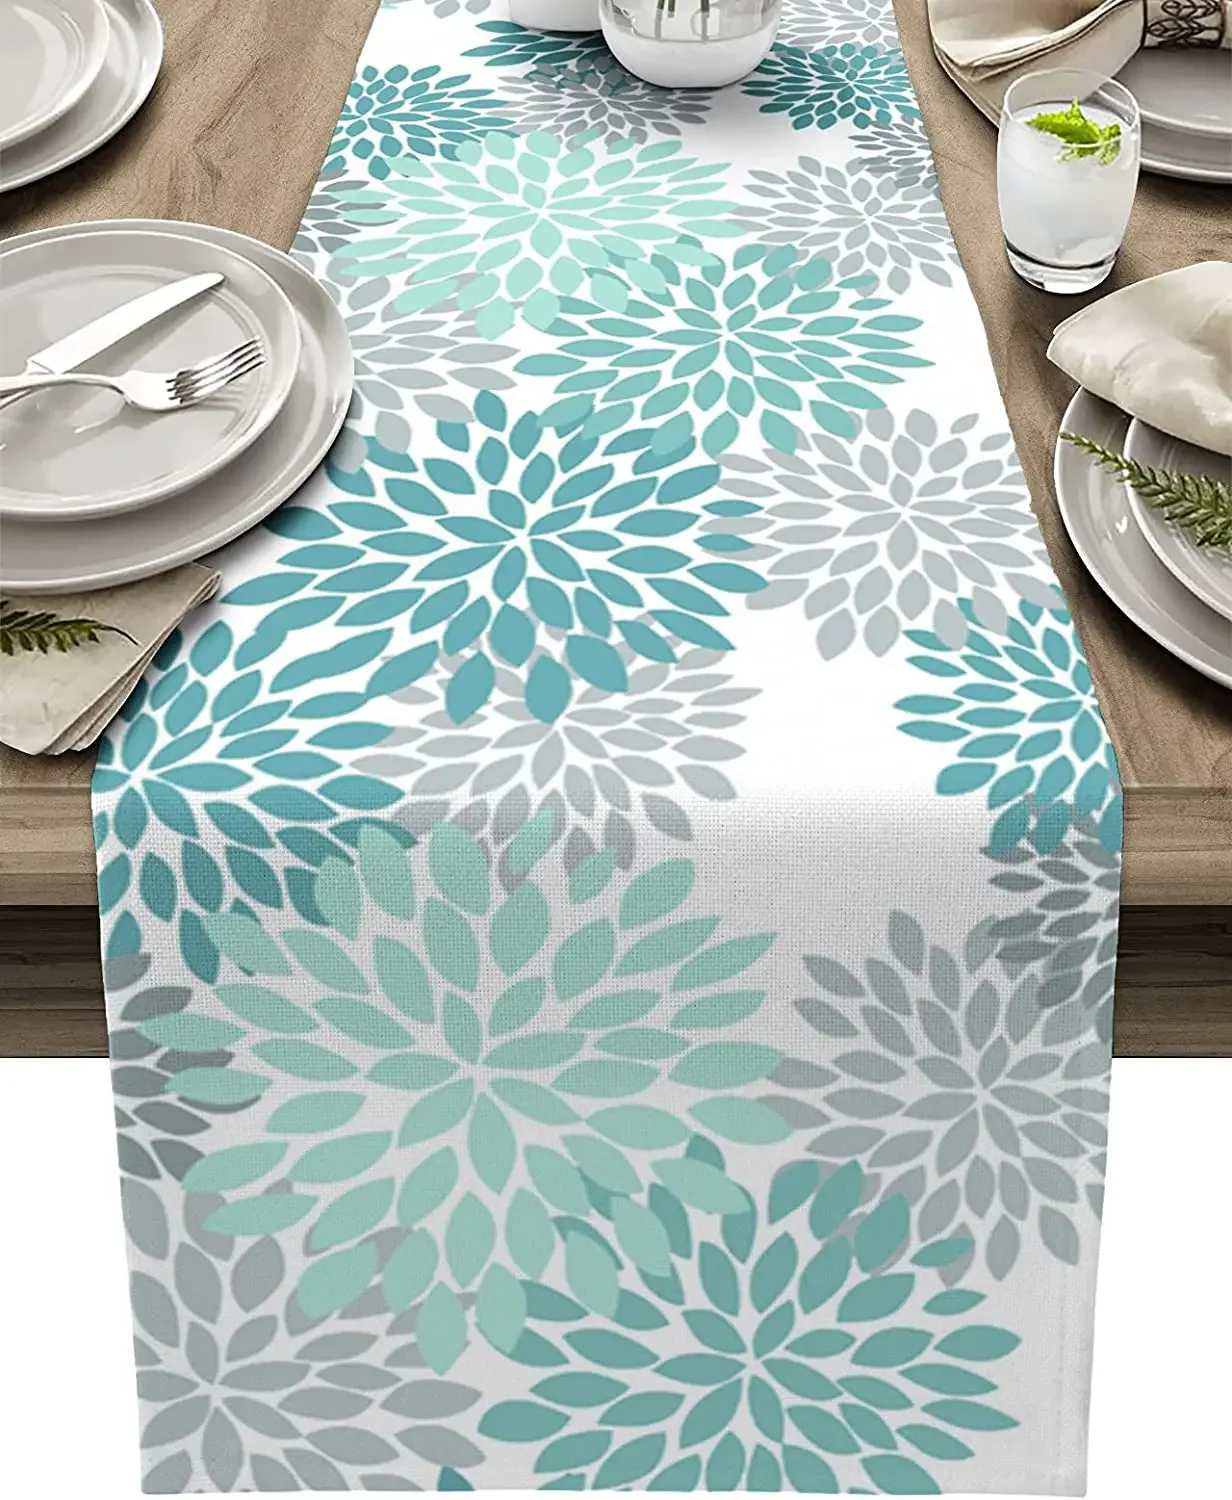 Colorful Dahila Flower Linen Table Runners Kitchen Table Decoration Washable Dining Table Runners Wedding Party Decorations